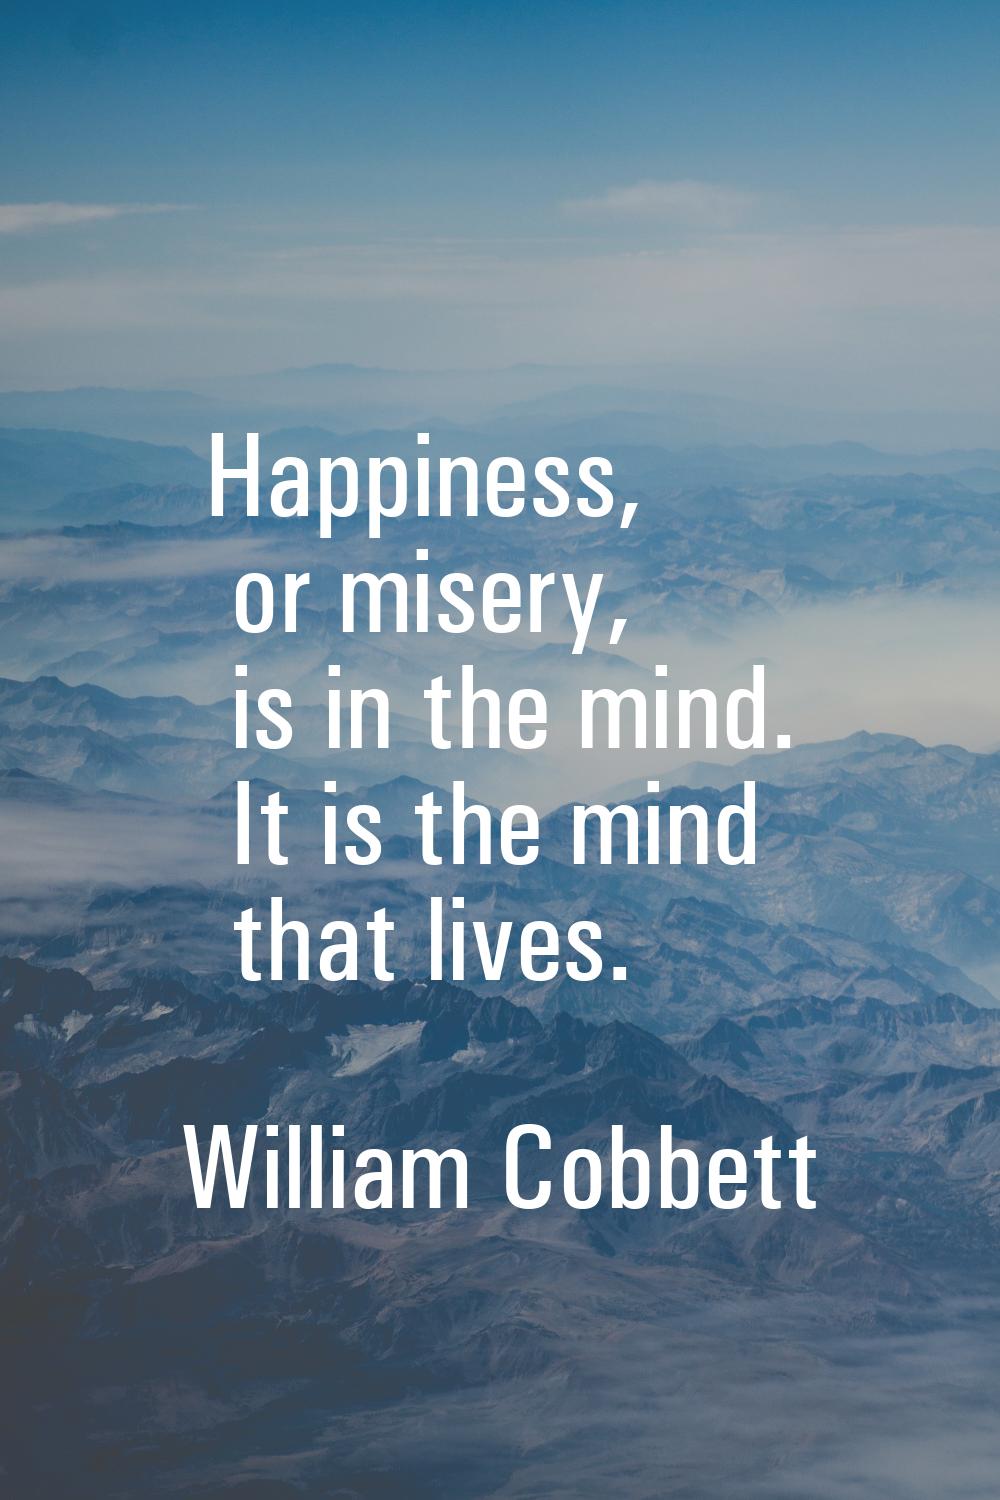 Happiness, or misery, is in the mind. It is the mind that lives.